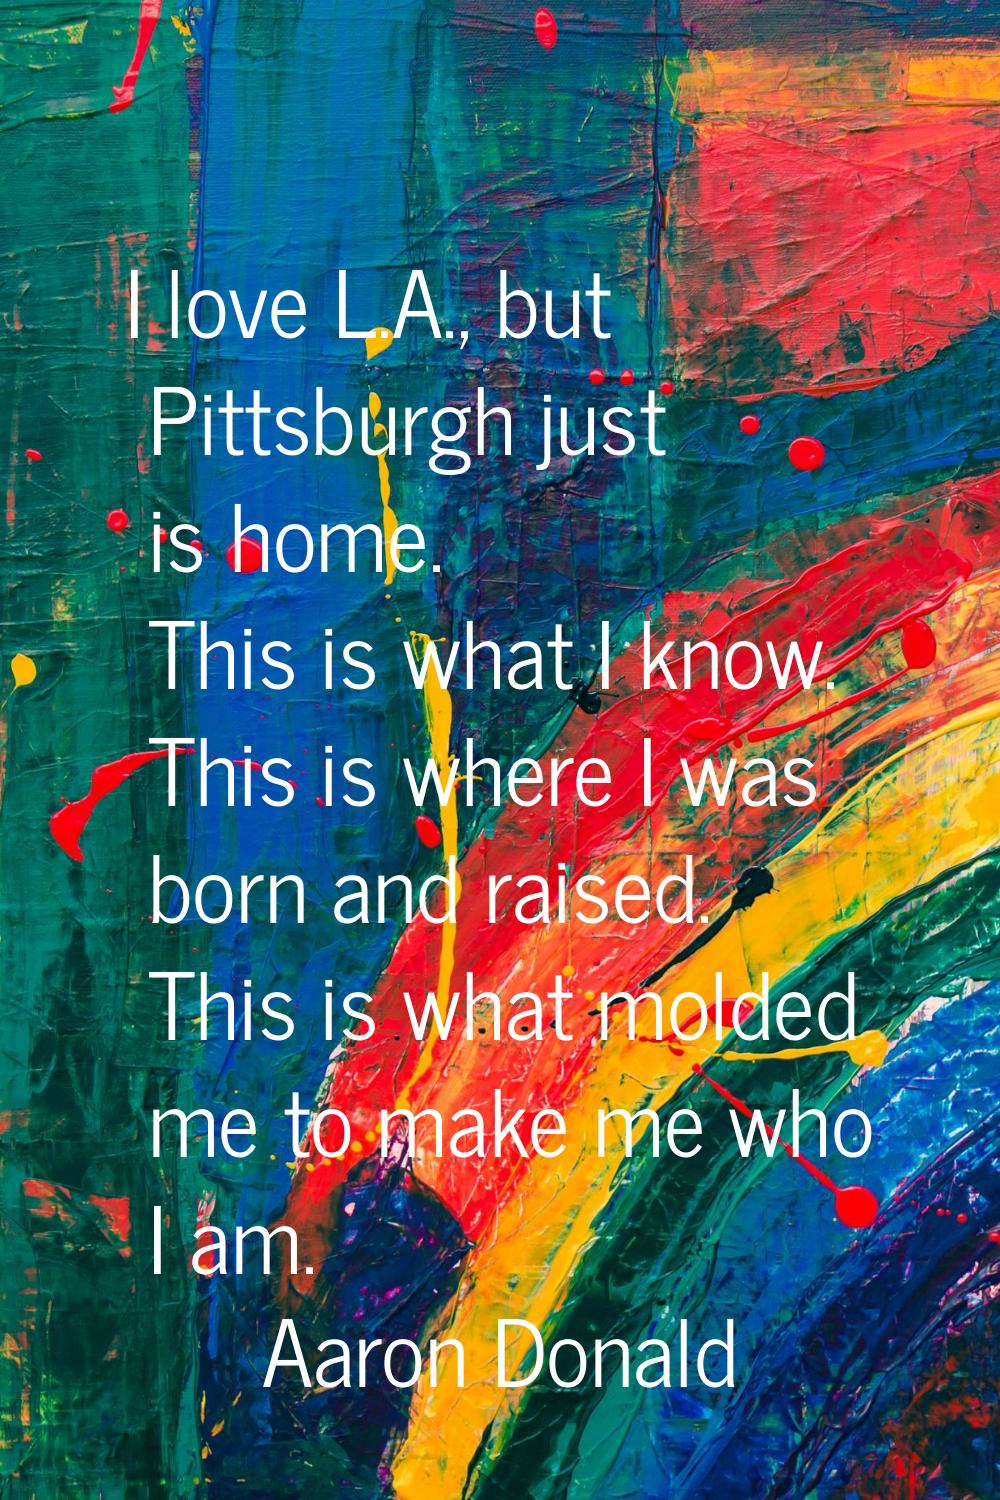 I love L.A., but Pittsburgh just is home. This is what I know. This is where I was born and raised.